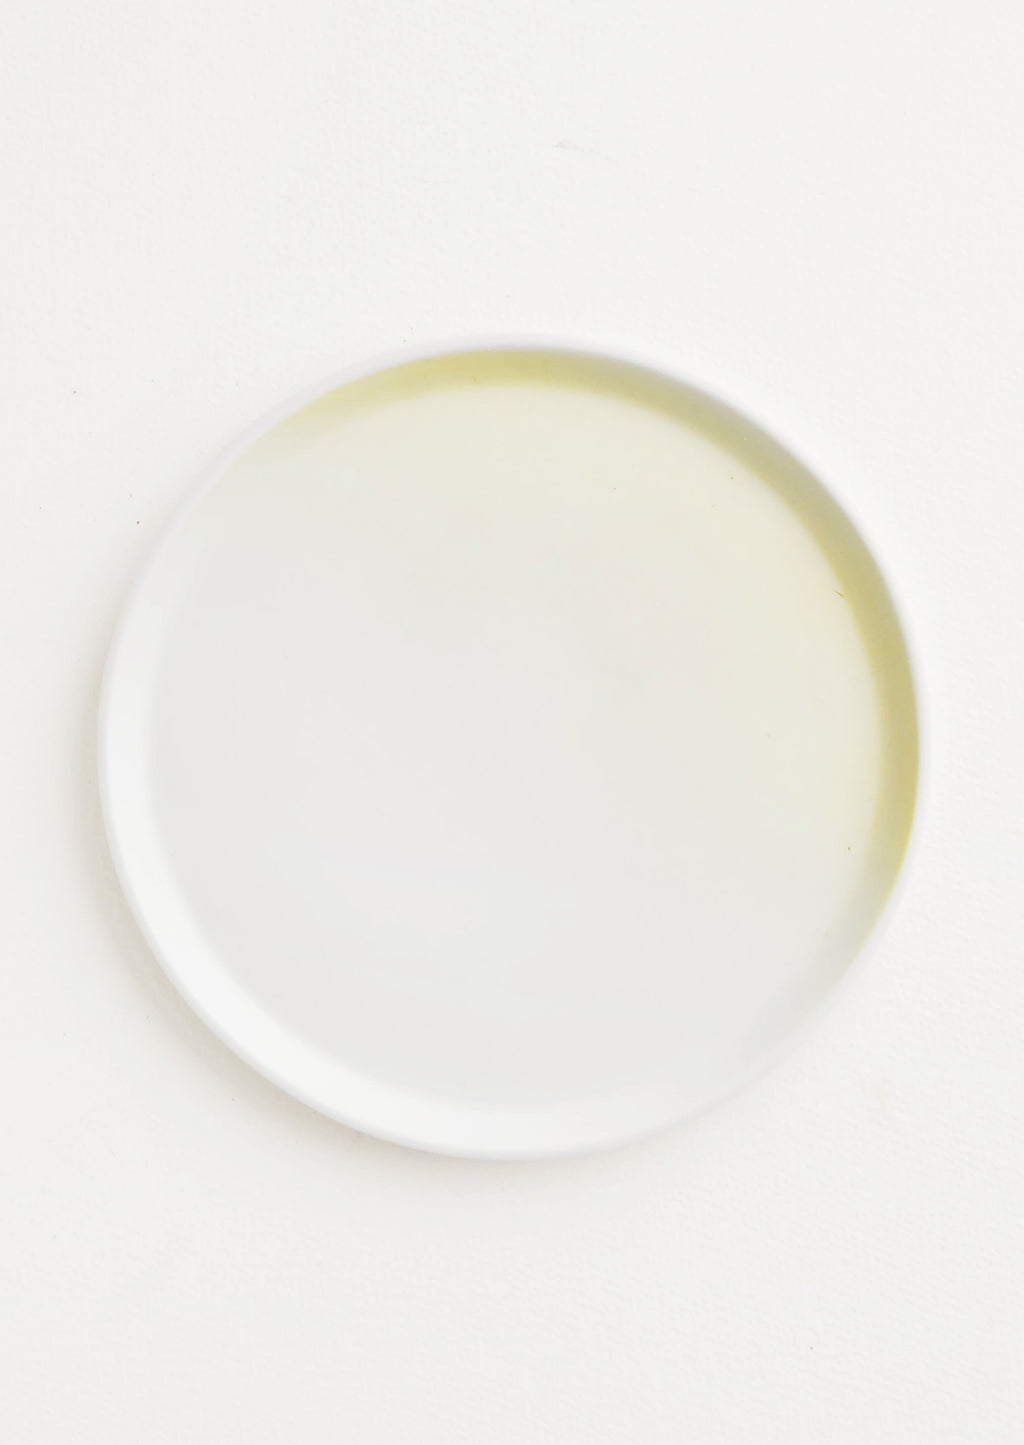 Daylight: A rimmed white and yellow ombre porcelain plate.